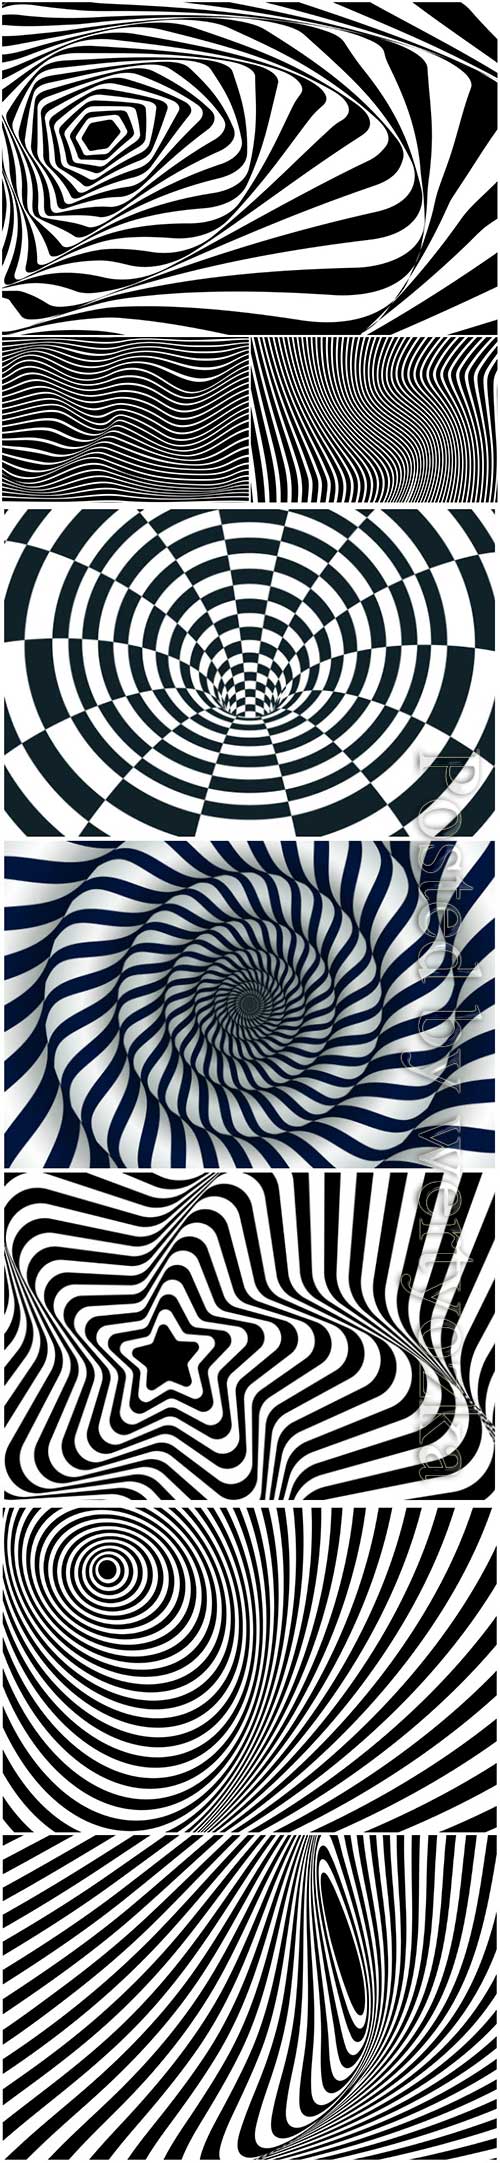 Psychedelic optical illusion vector background # 6